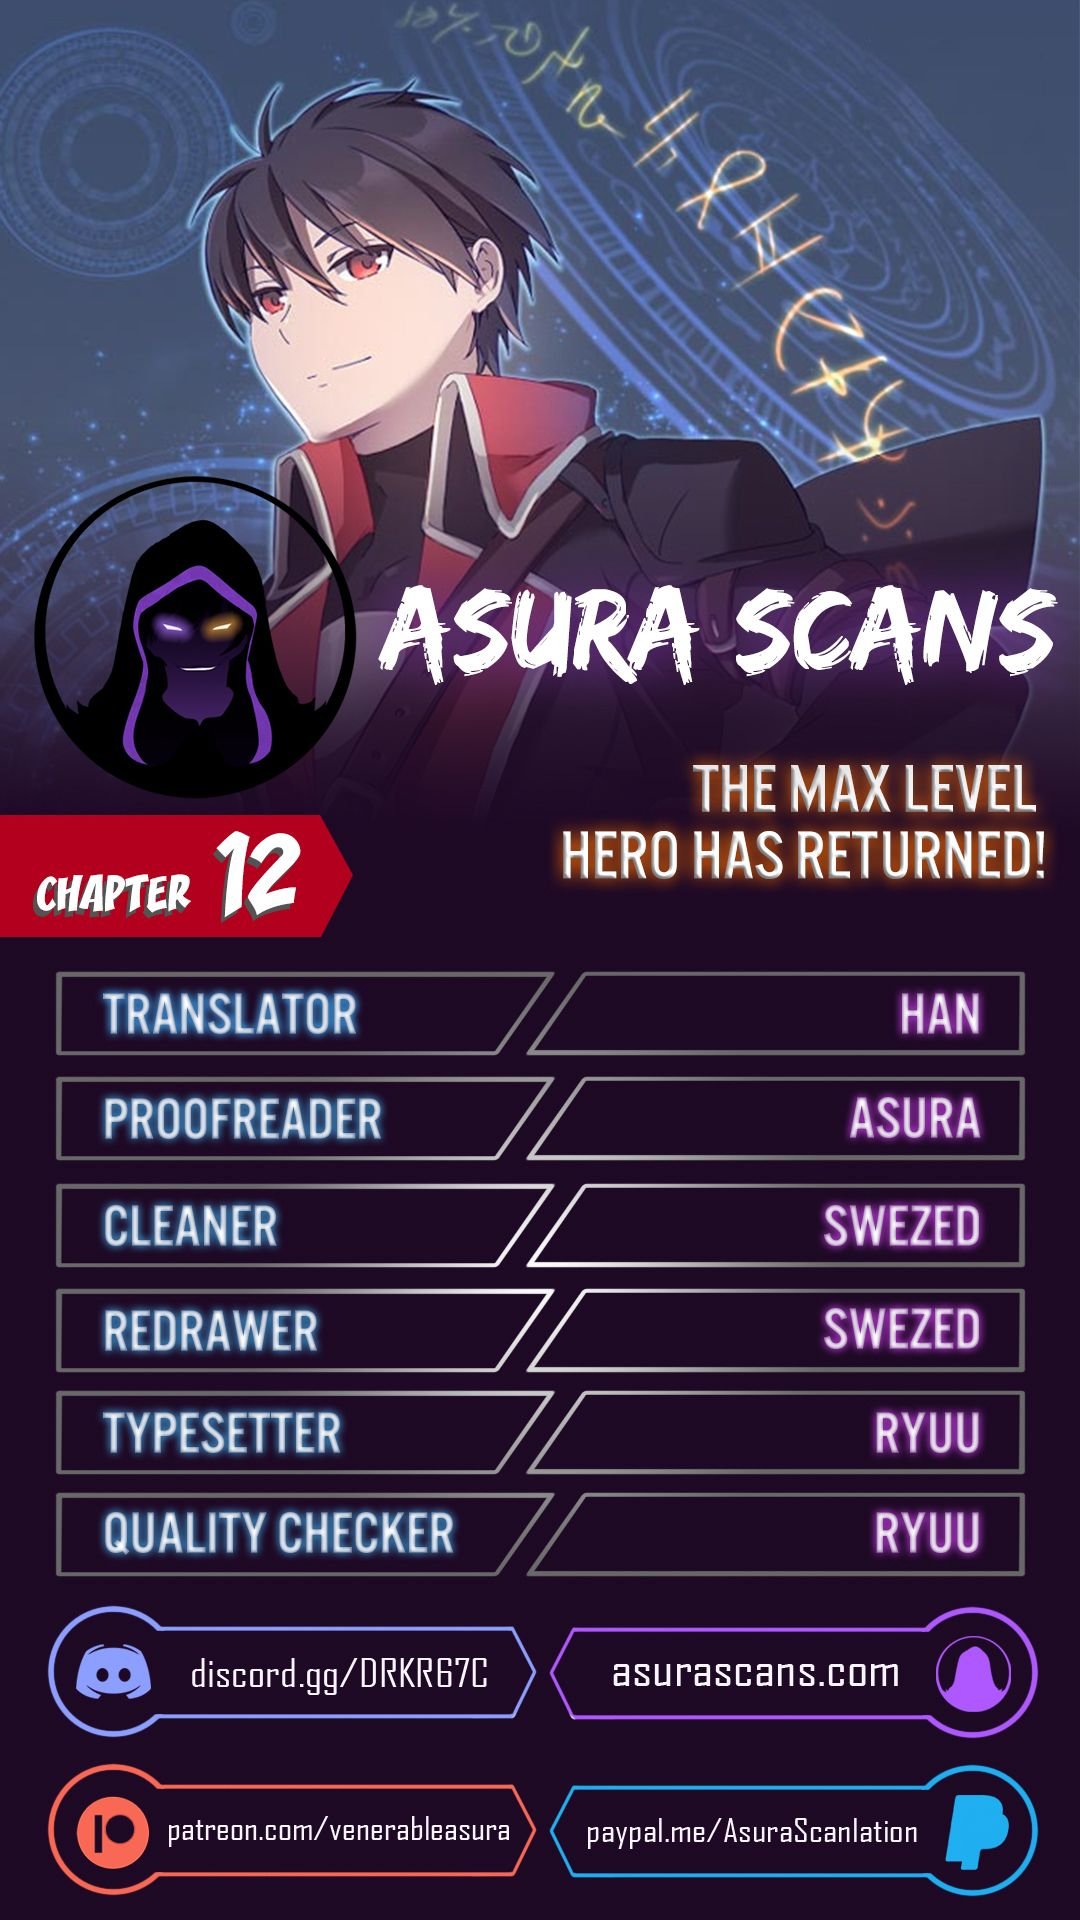 The MAX leveled hero will return! Chapter 12